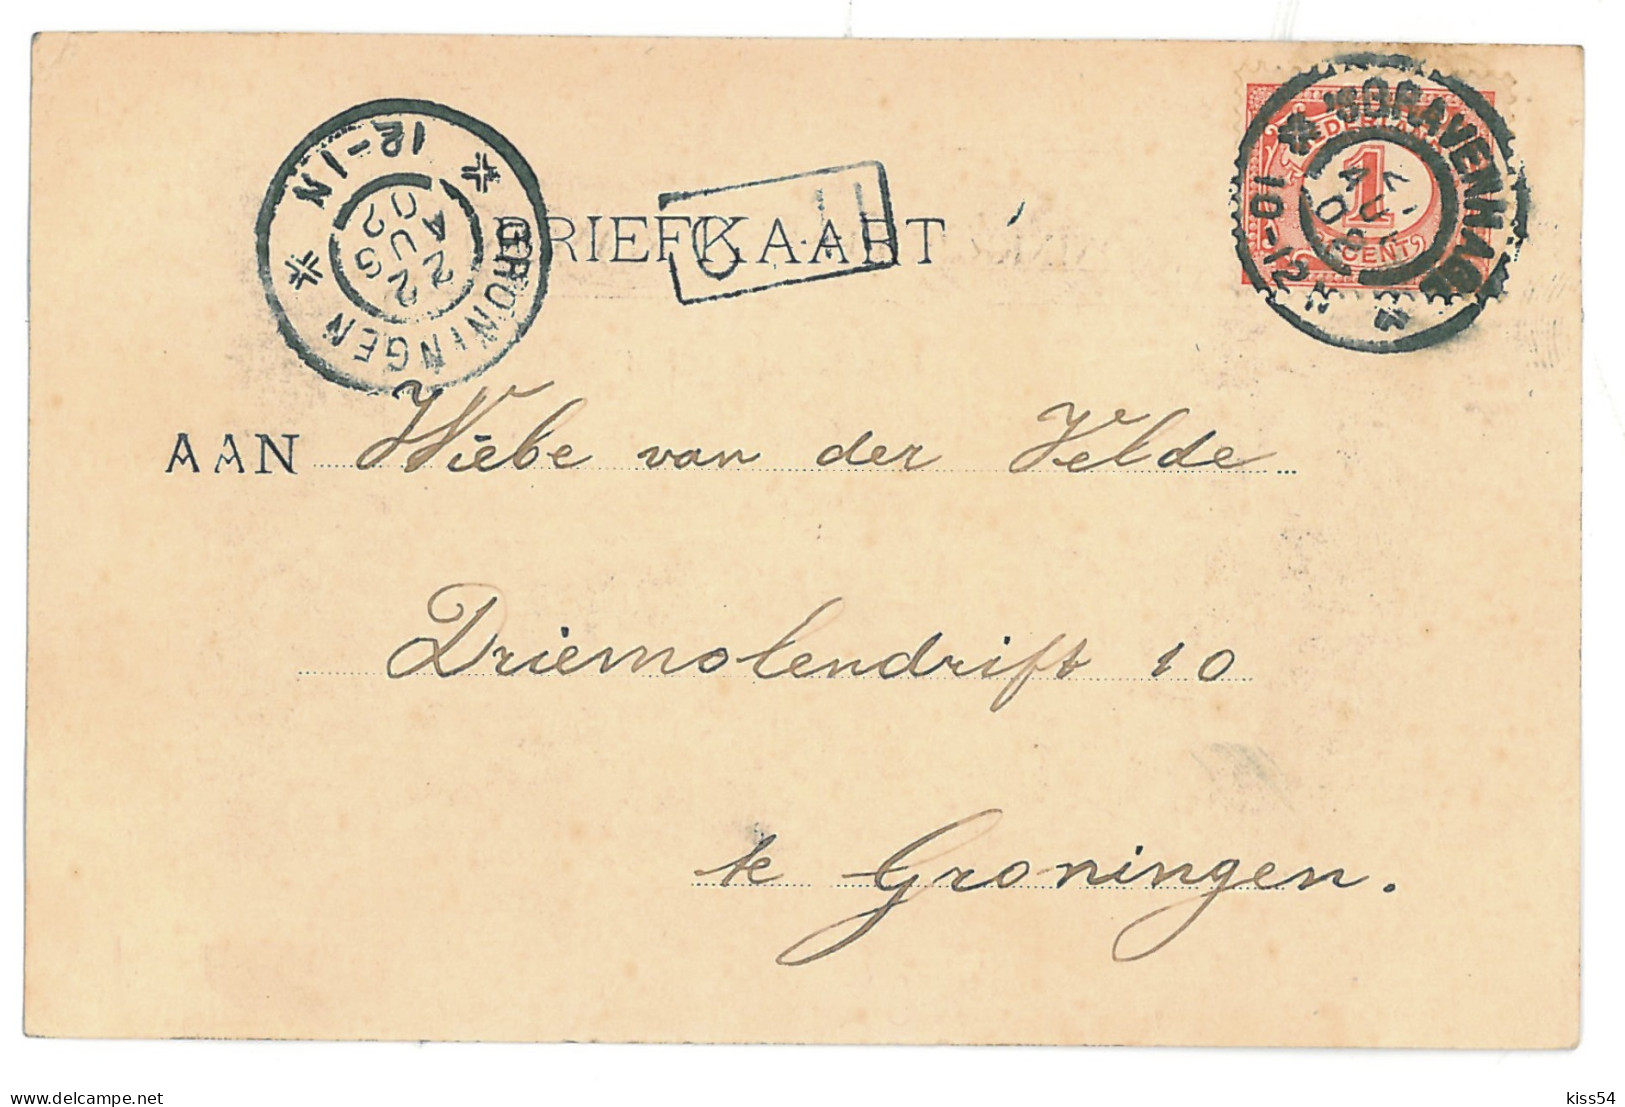 NED 4 - 12210 HOLLAND, Litho, Banknote 10 Gulden - Old Postcard - Used - 1902  - Monnaies (représentations)